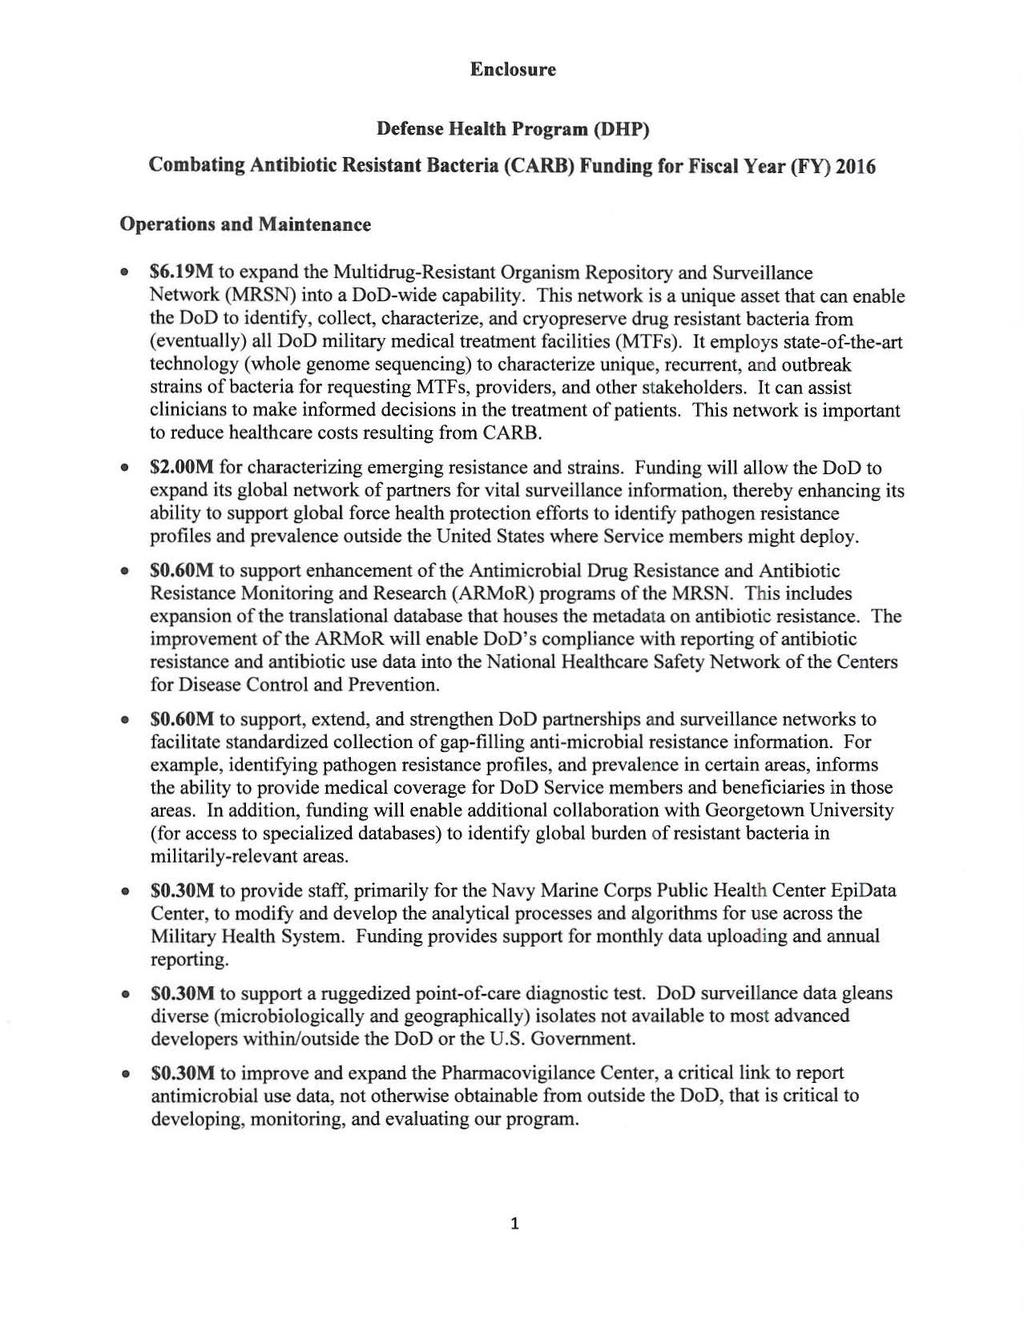 Enclosure Defense Health Program (DHP) Combating Antibiotic Resistant Bacteria (CARD) Funding for Fiscal Year (FY) 2016 Operations and Maintenance $6.